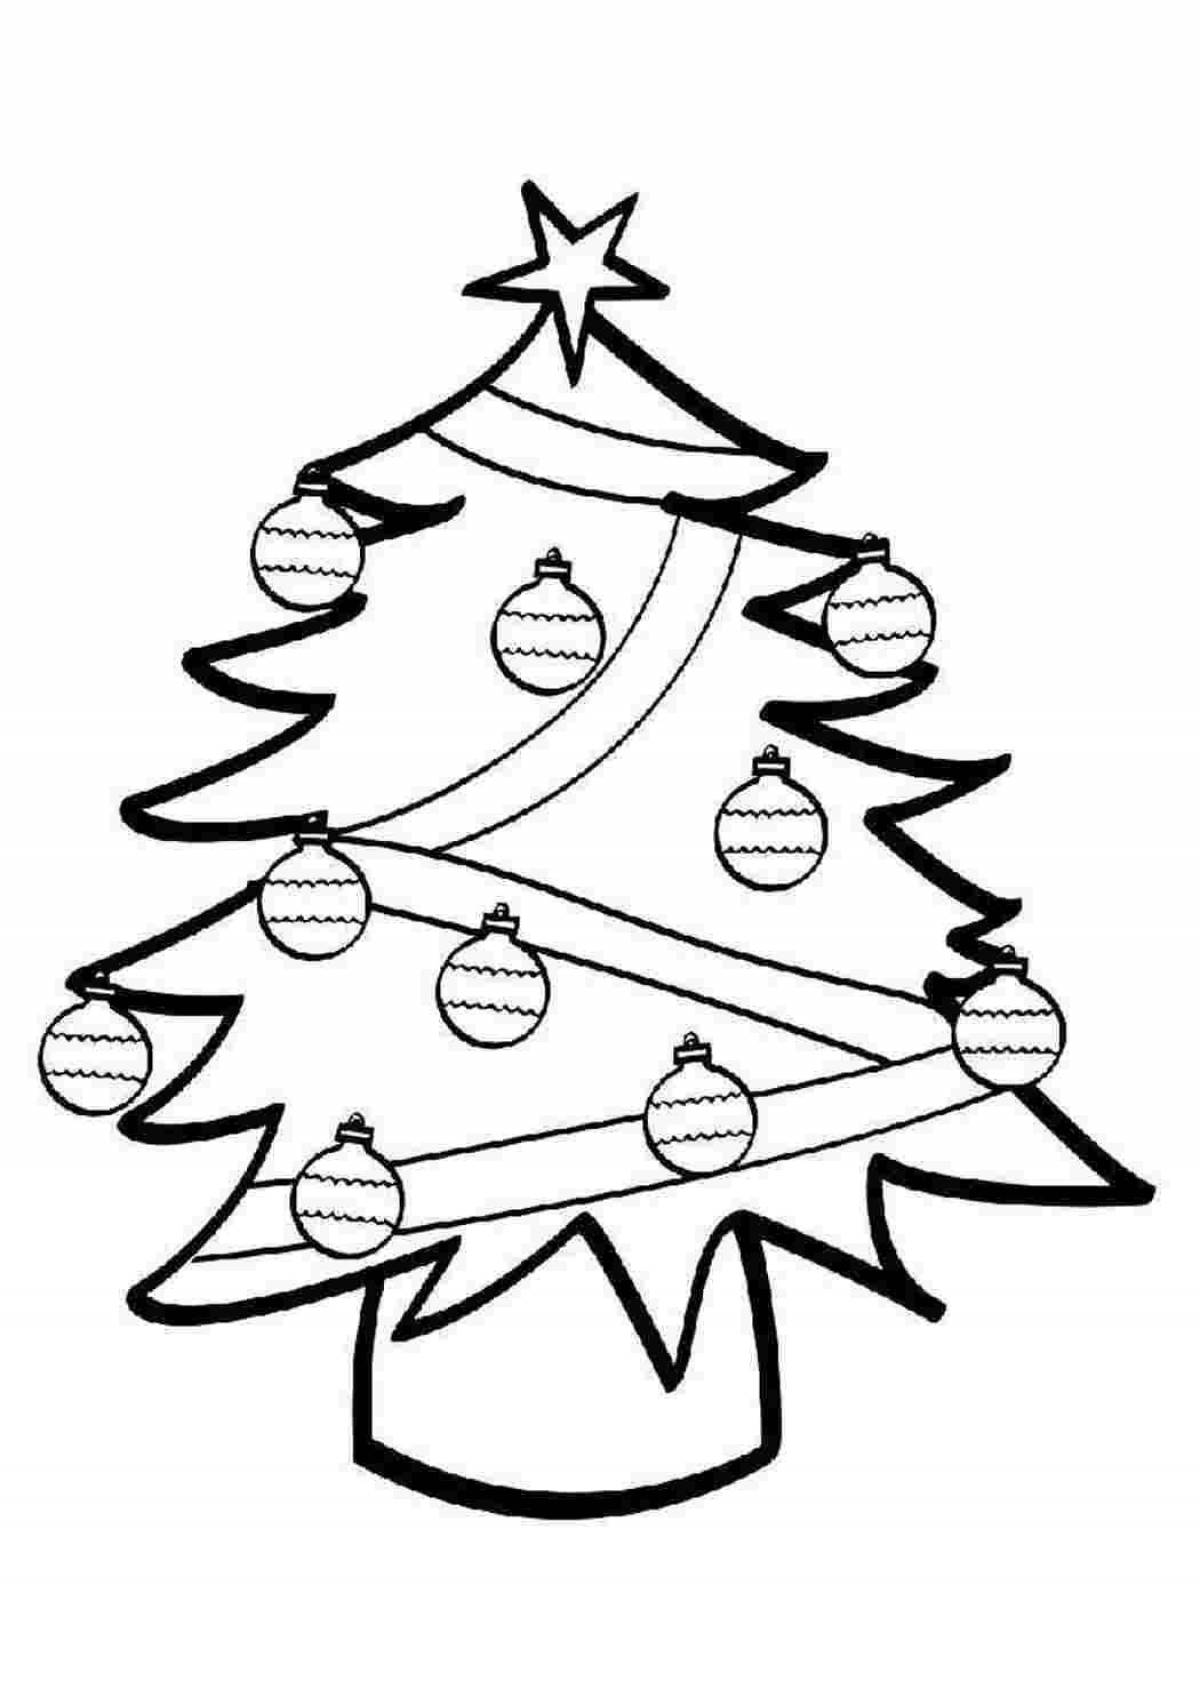 Coloring mystical Christmas tree